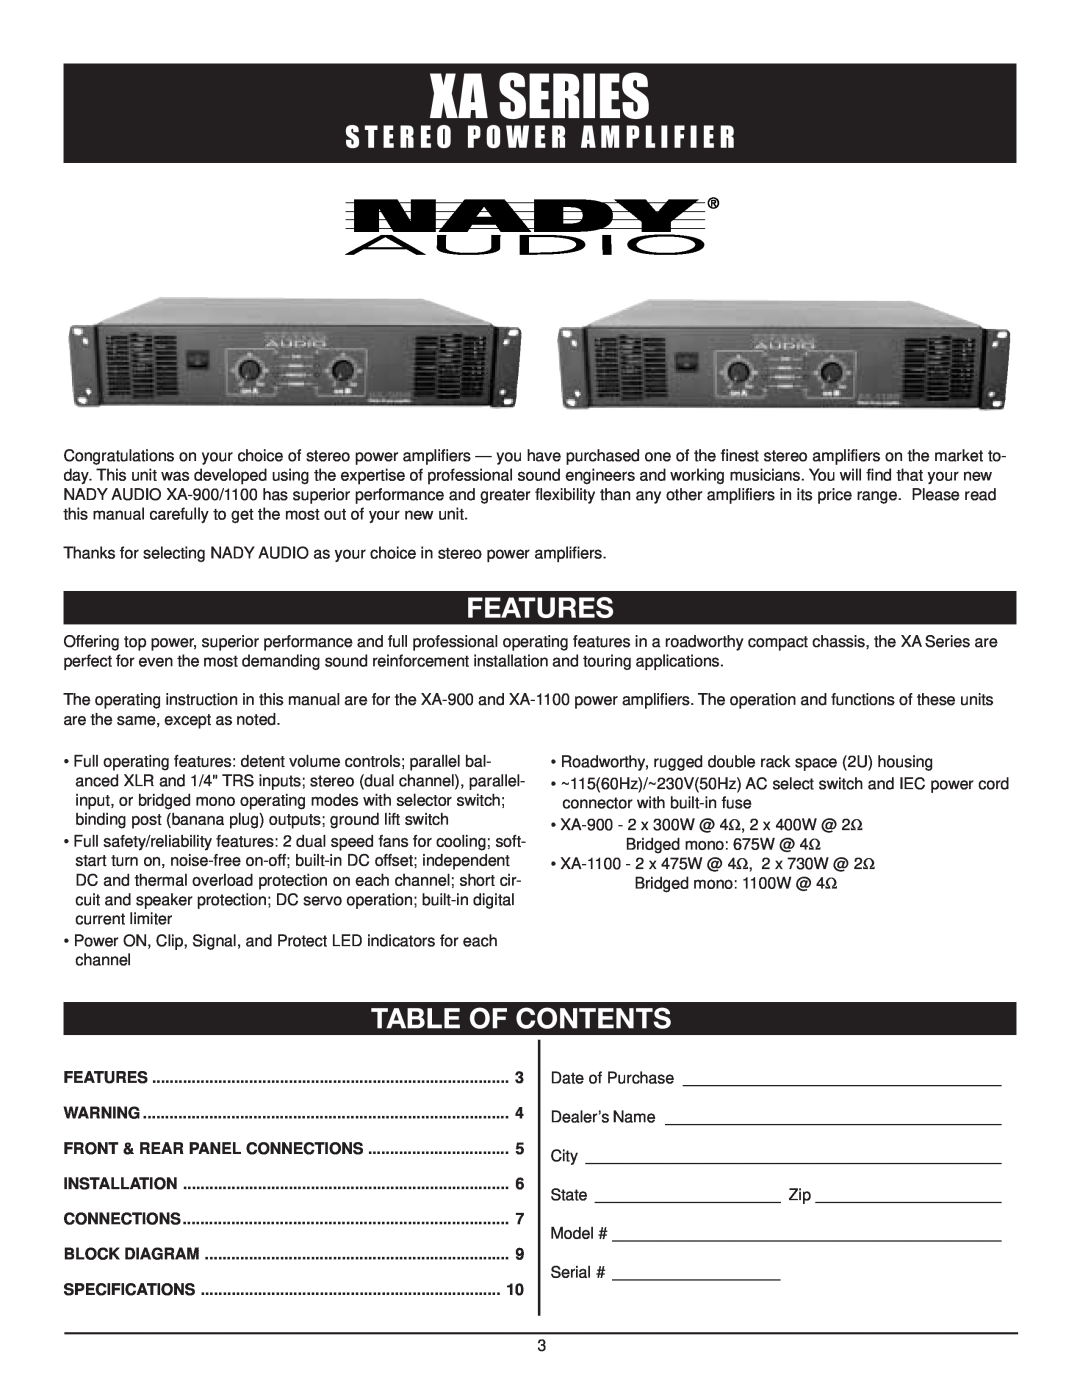 Nady Systems SPA 850 owner manual Features, Table Of Contents, Xa Series, S T E R E O P O W E R A M P L I F I E R 